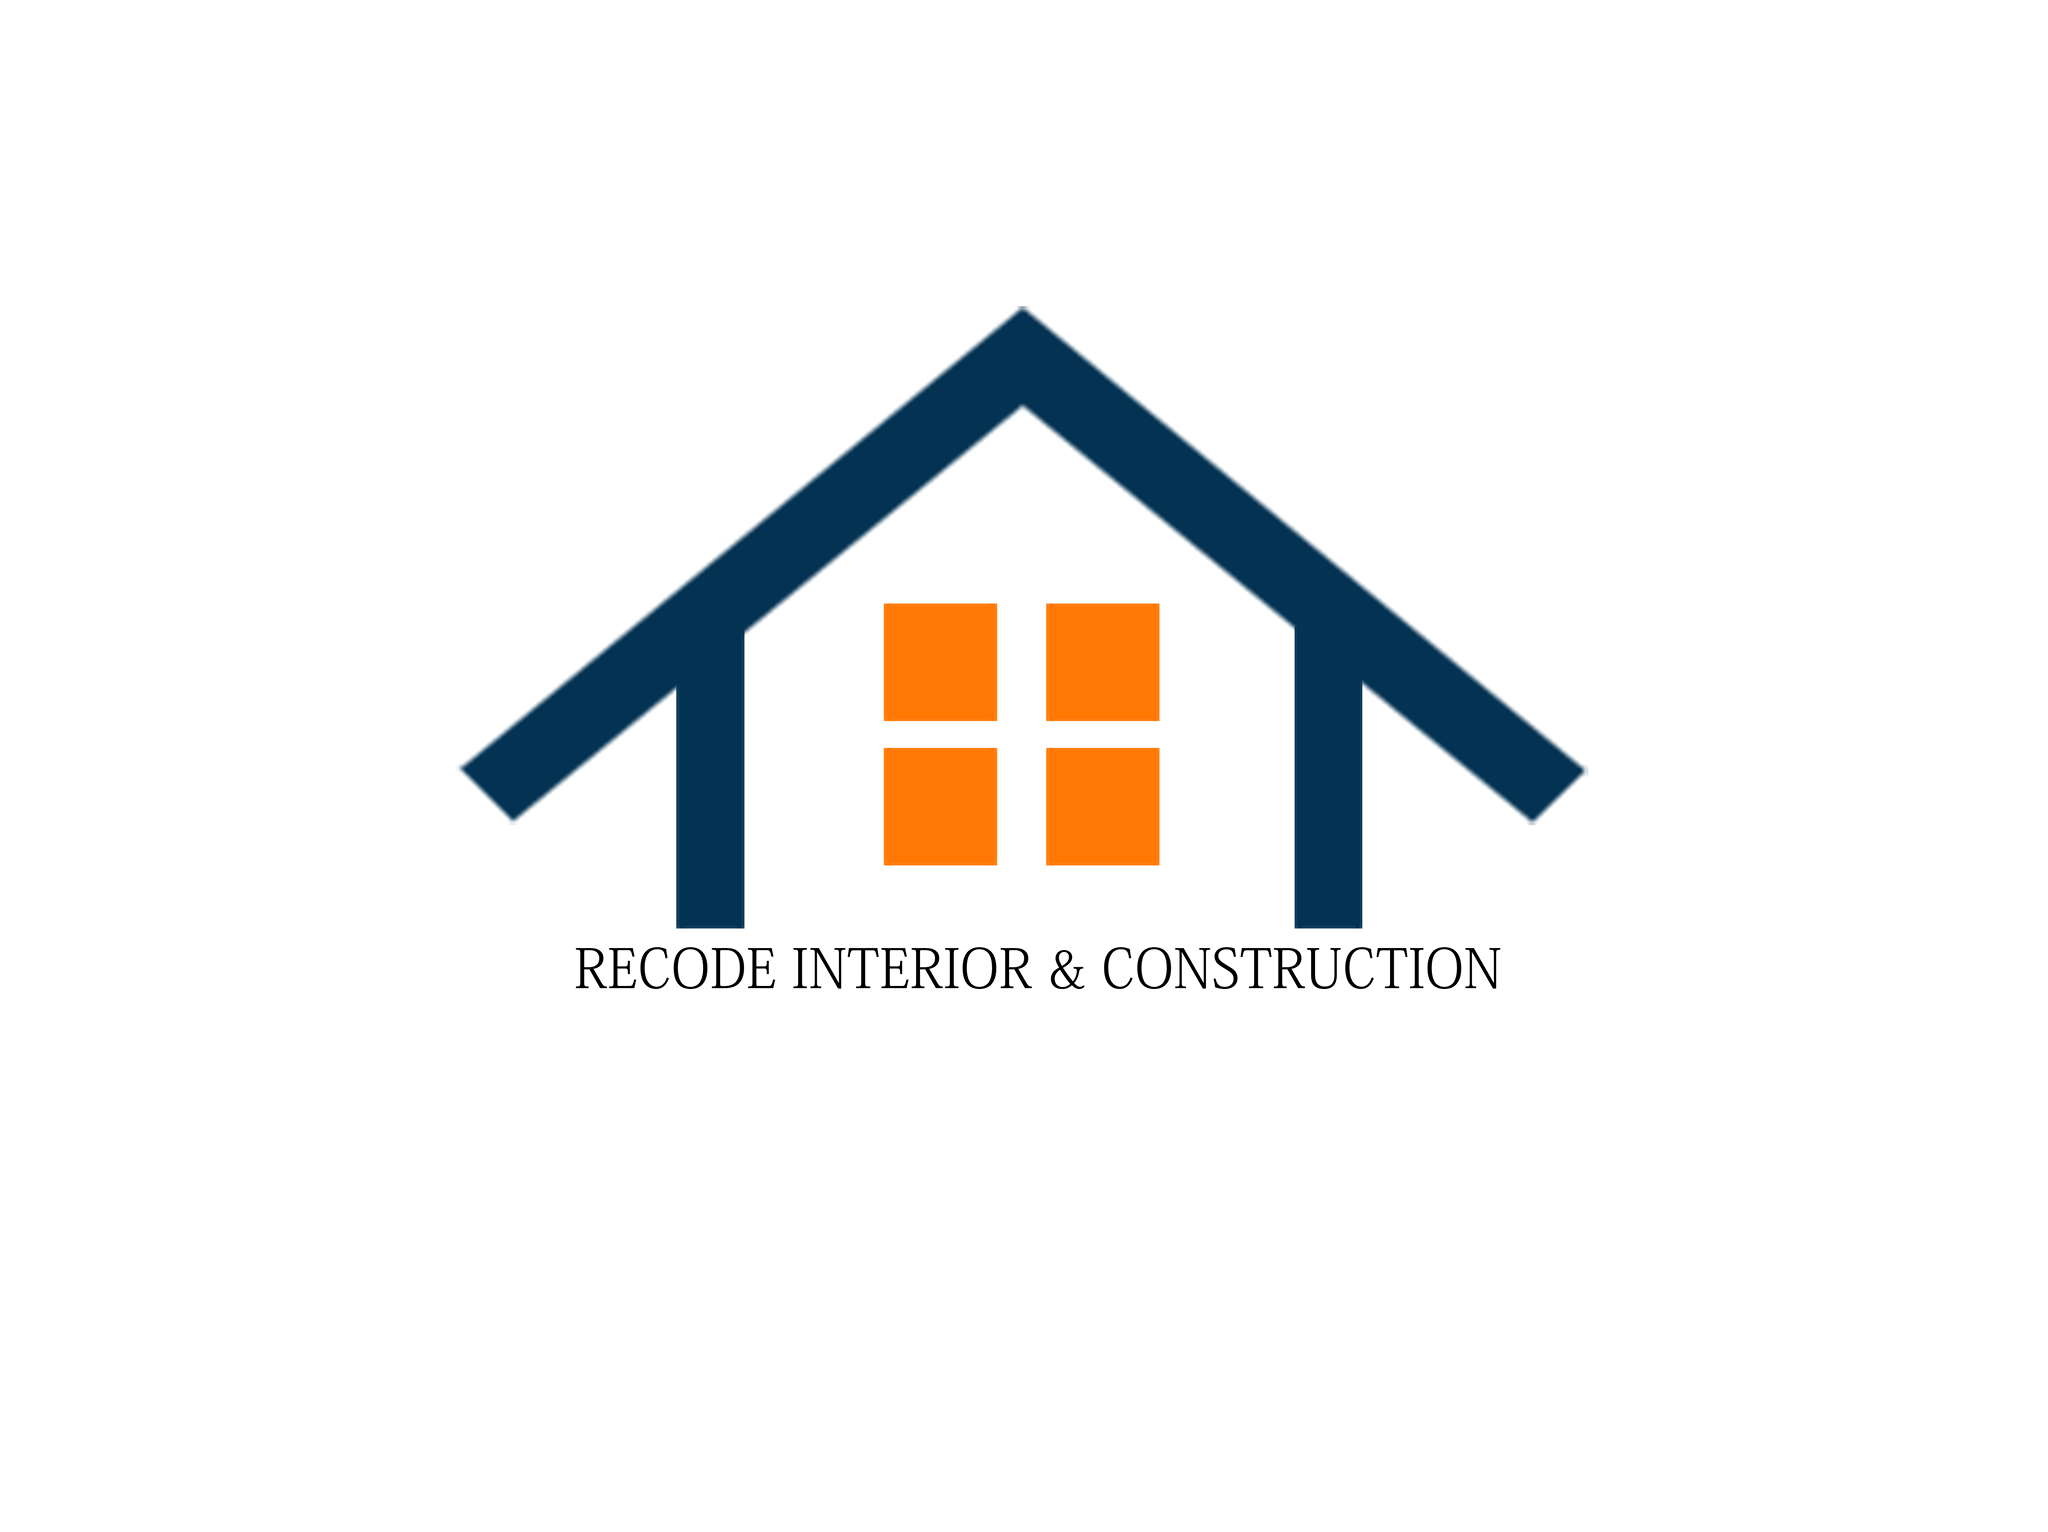 RECODE INTERIOR & CONSTRUCTION|Architect|Professional Services